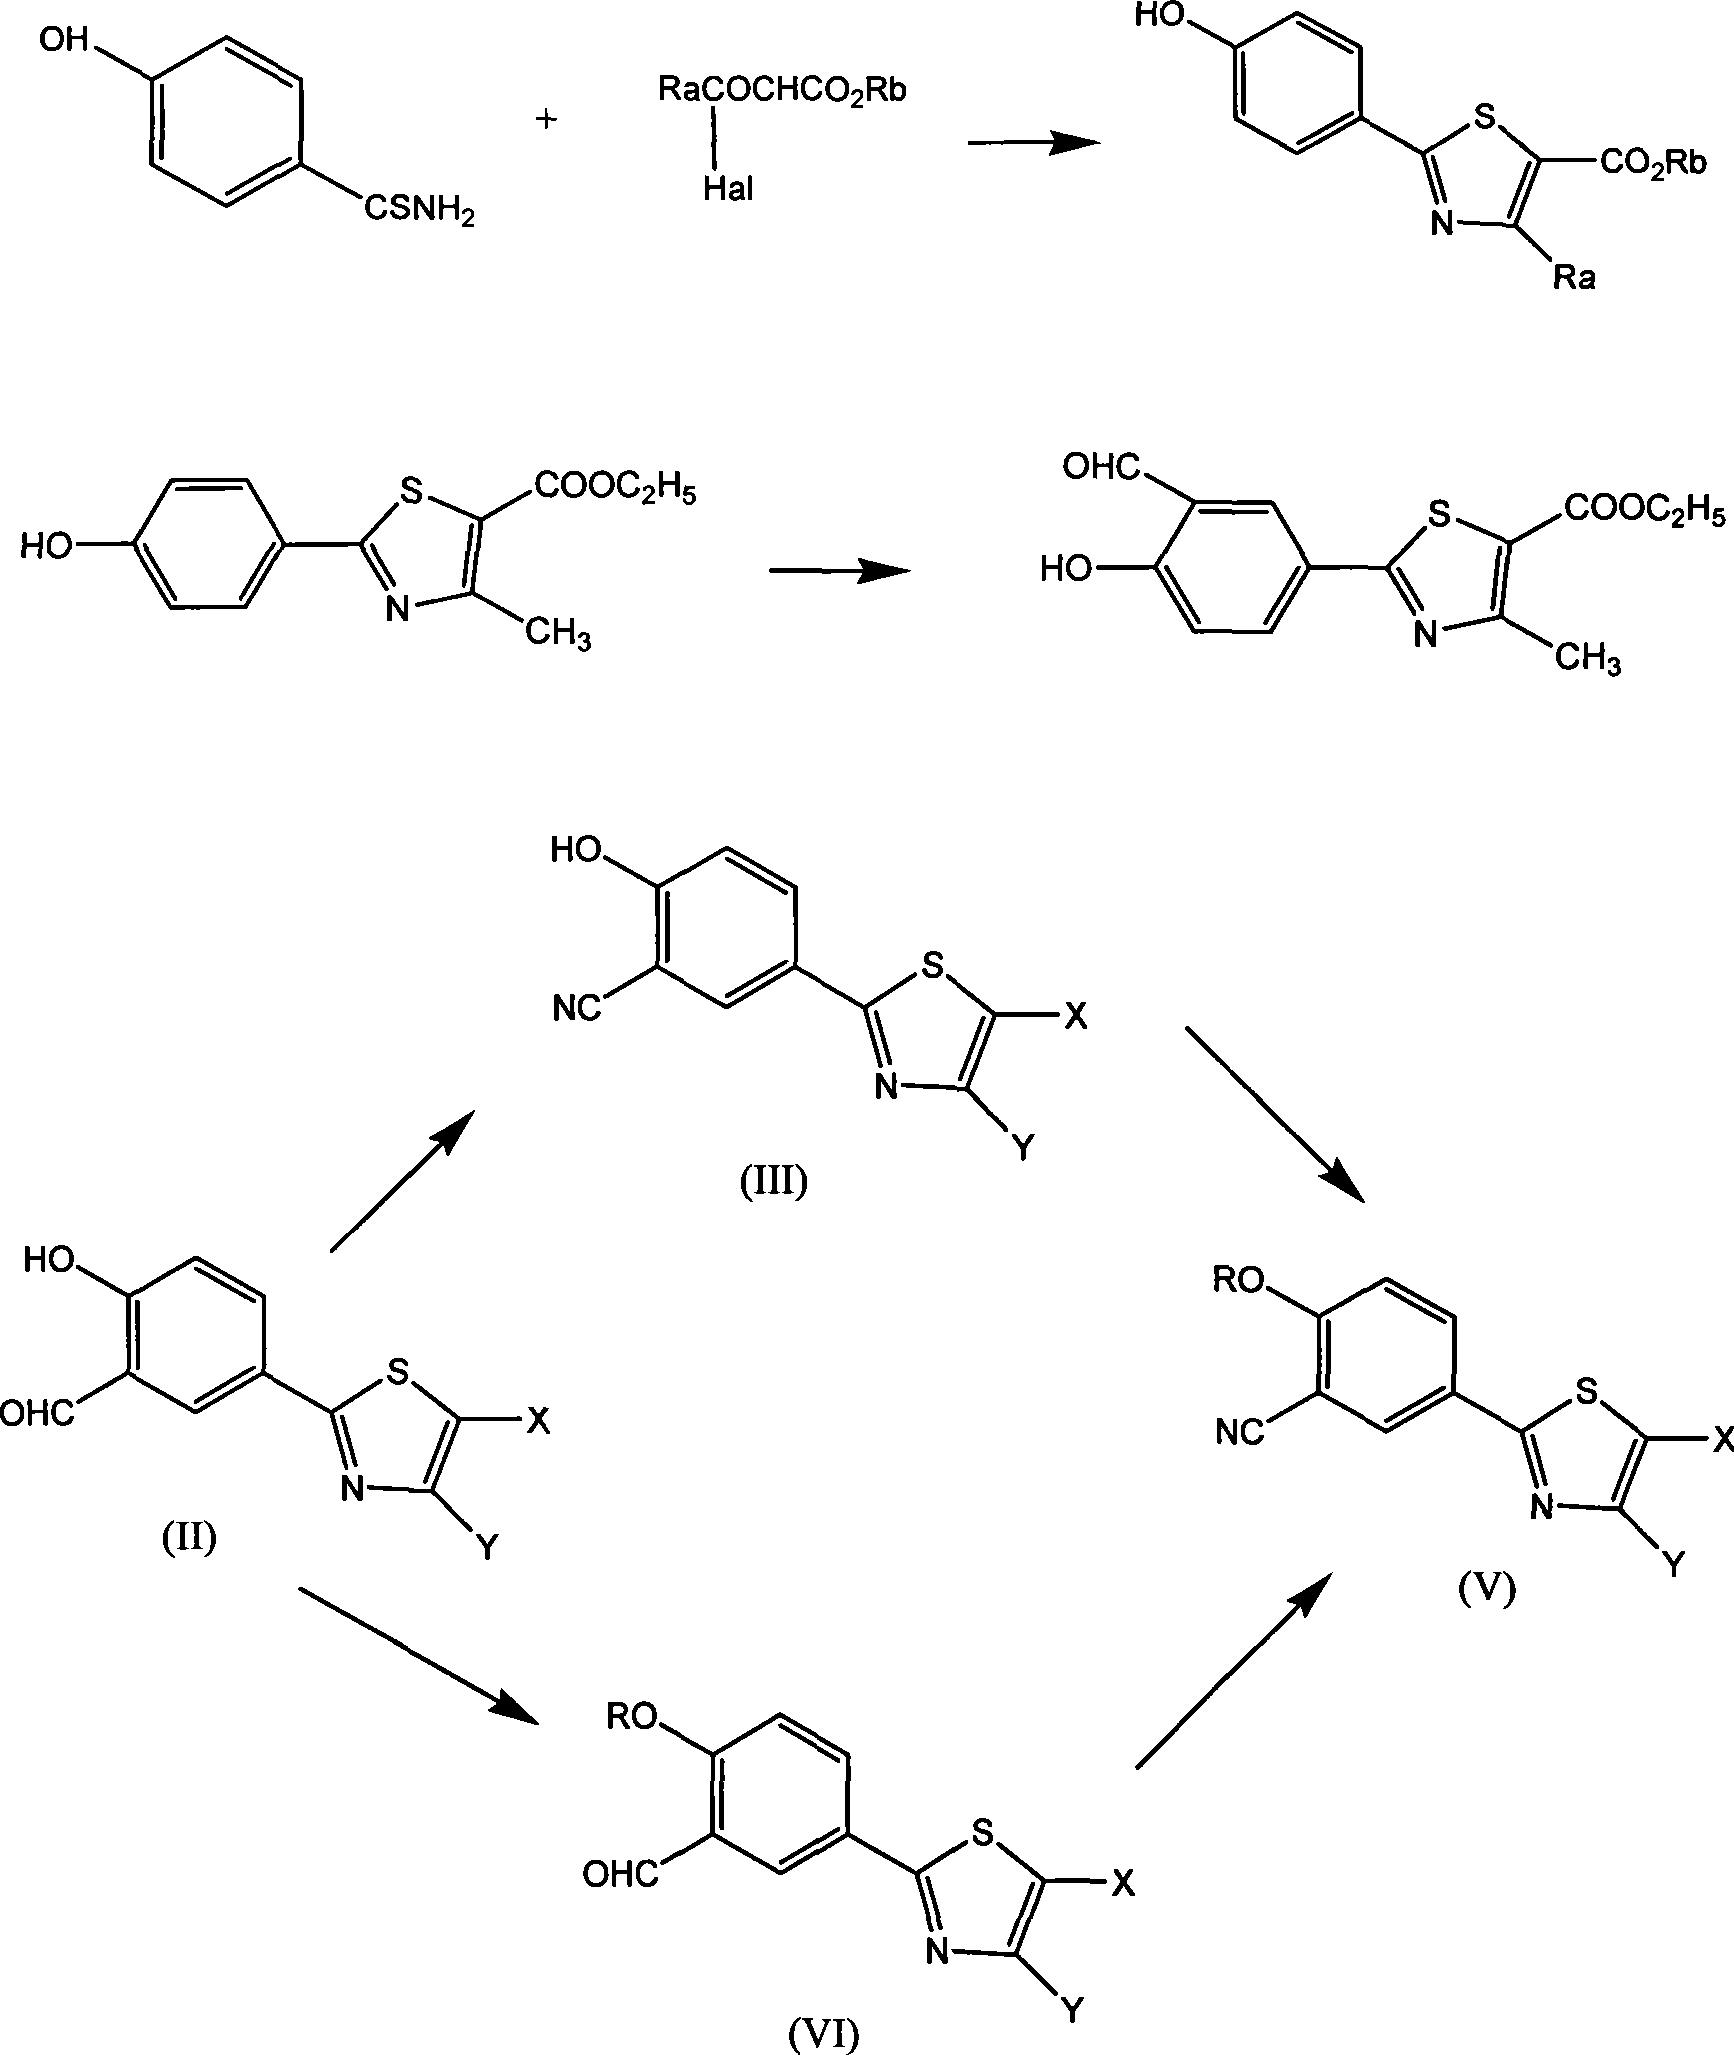 Aromatic nitrile-base thiazole derivatives for inhibiting xanthine oxidase activity, preparation method and application